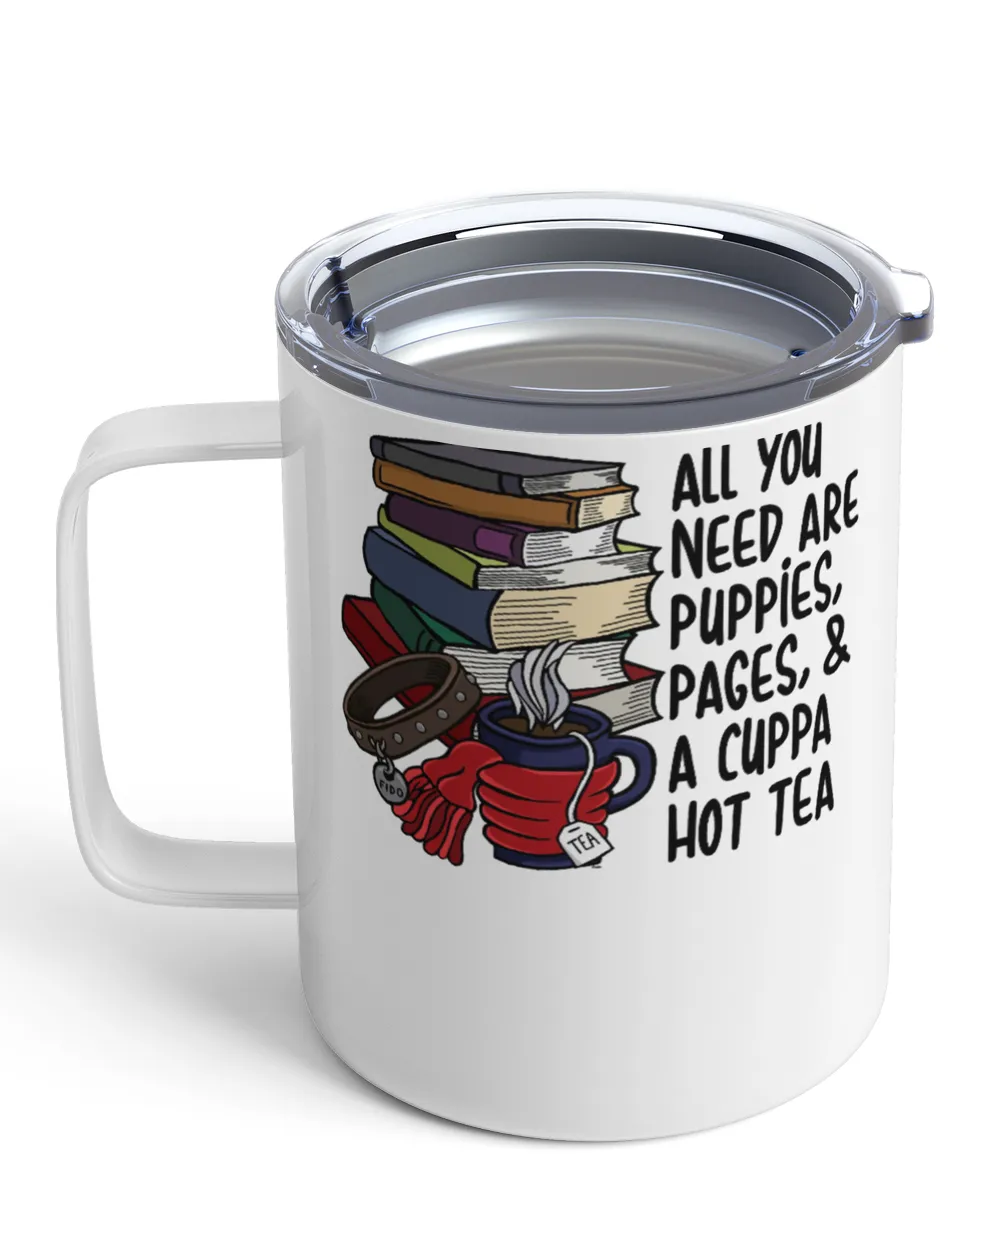 Book Reader Puppies Pages and Hot Tea 275 Reading Library